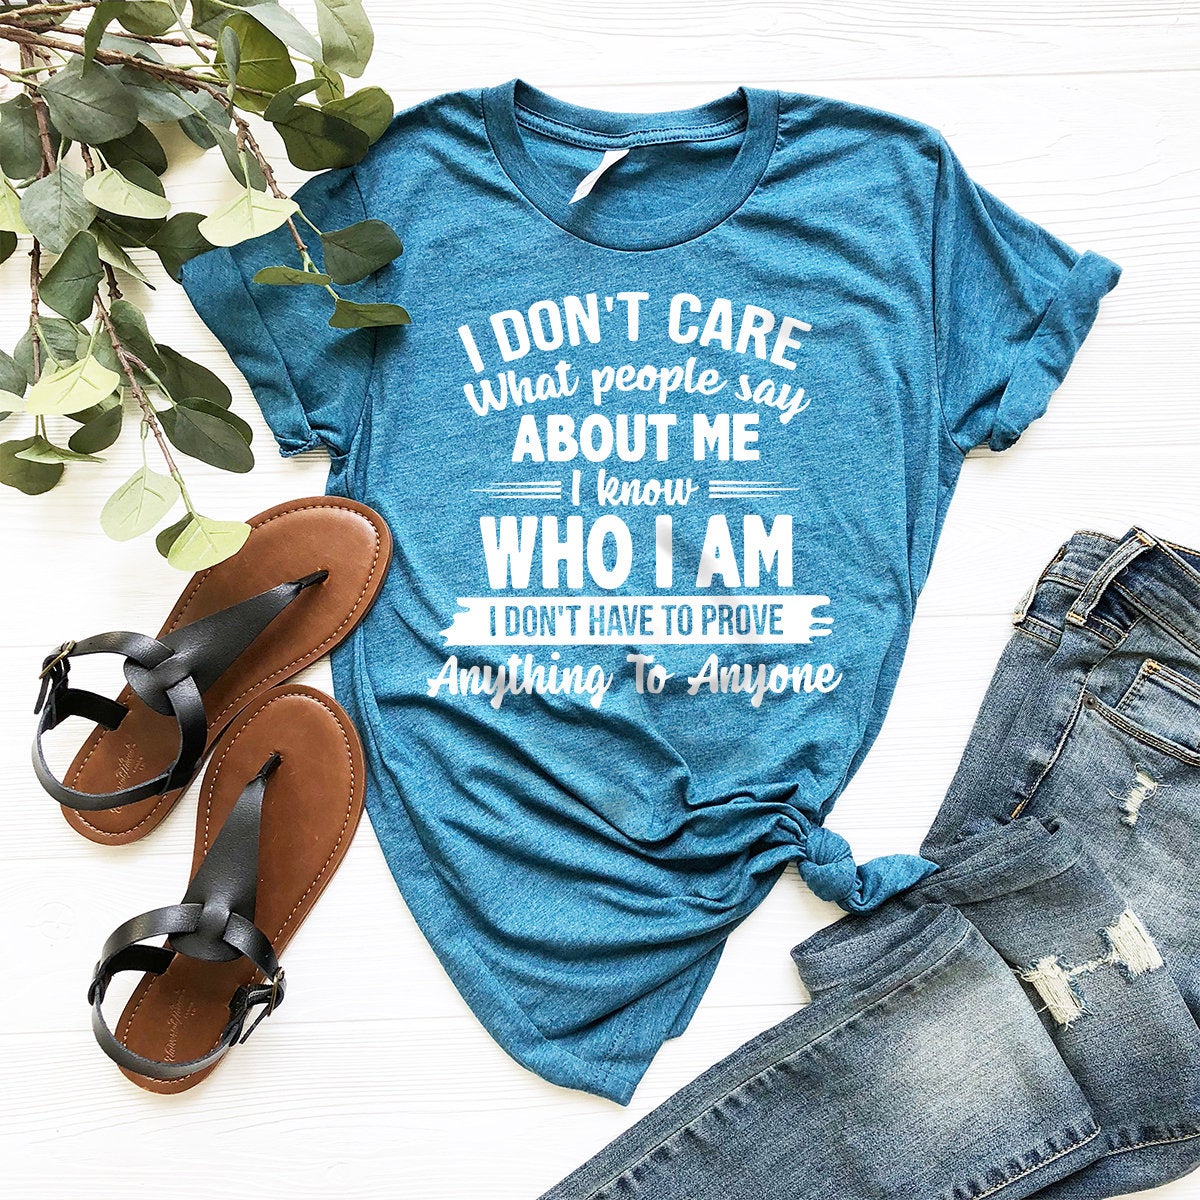 Motivational Quote Shirt, Inspirational Shirt, Positive Vibes Shirt, Motivation Shirt, I Don't Care What People Say About Me I Know Who Am I - Fastdeliverytees.com